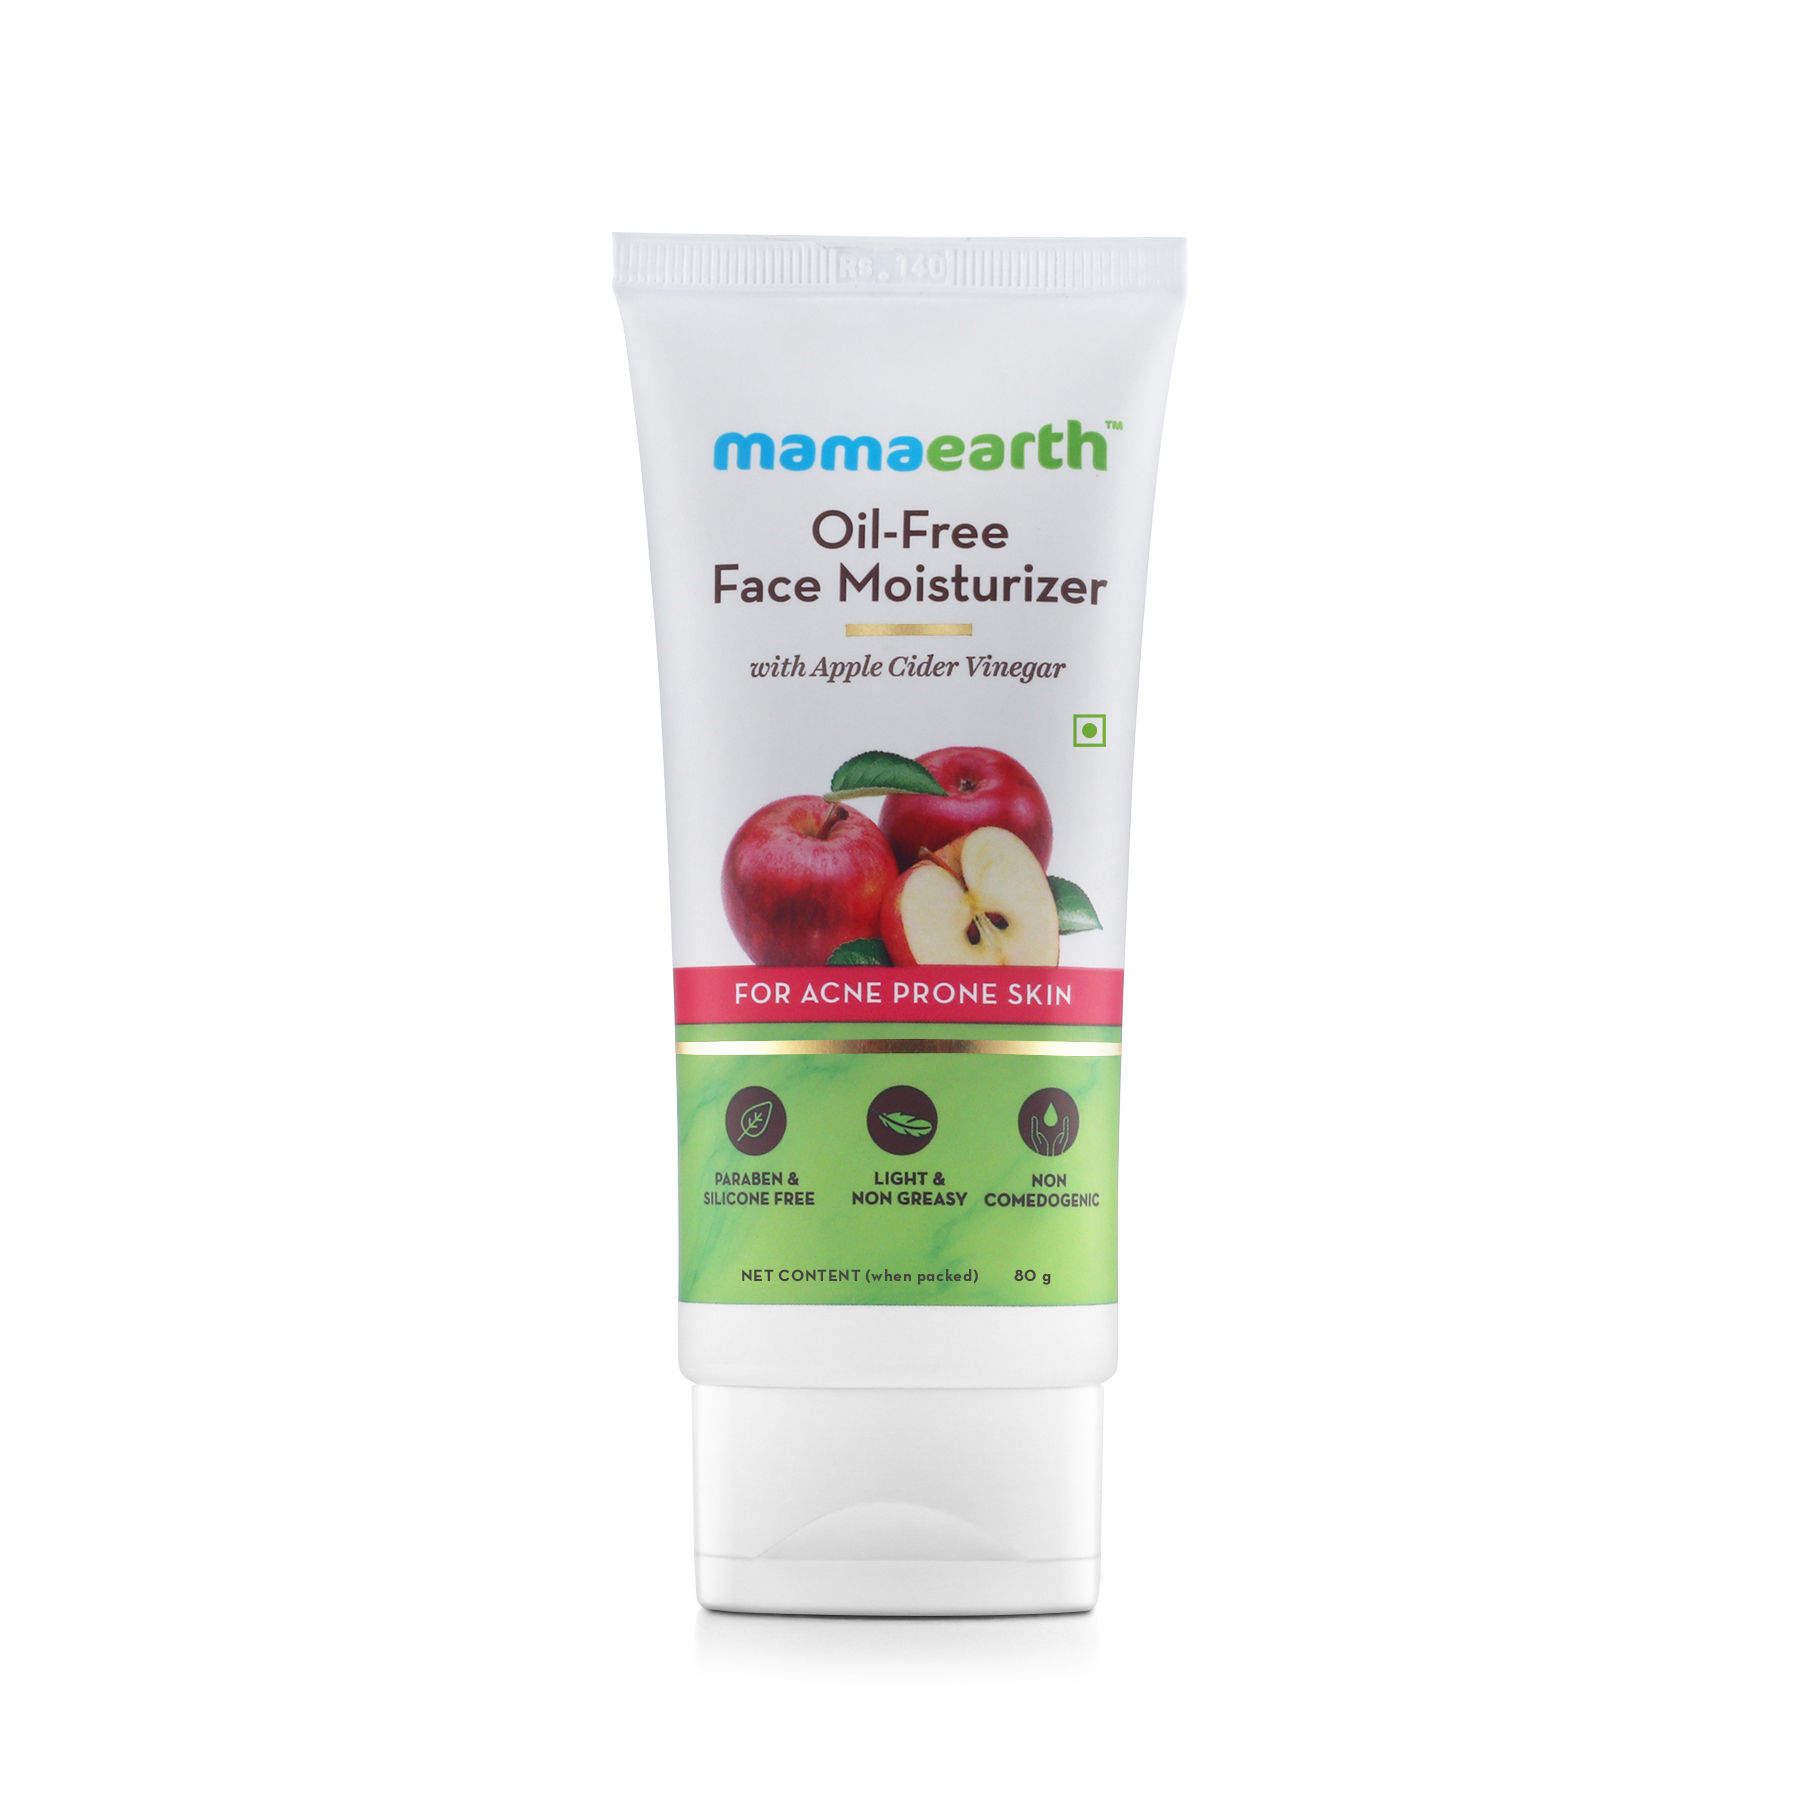 Mamaearth Oil Free Face Moisturizer With Apple Cider Vinegar For Acne Prone Skin Buy Mamaearth Oil Free Face Moisturizer With Apple Cider Vinegar For Acne Prone Skin Online At Best Price In